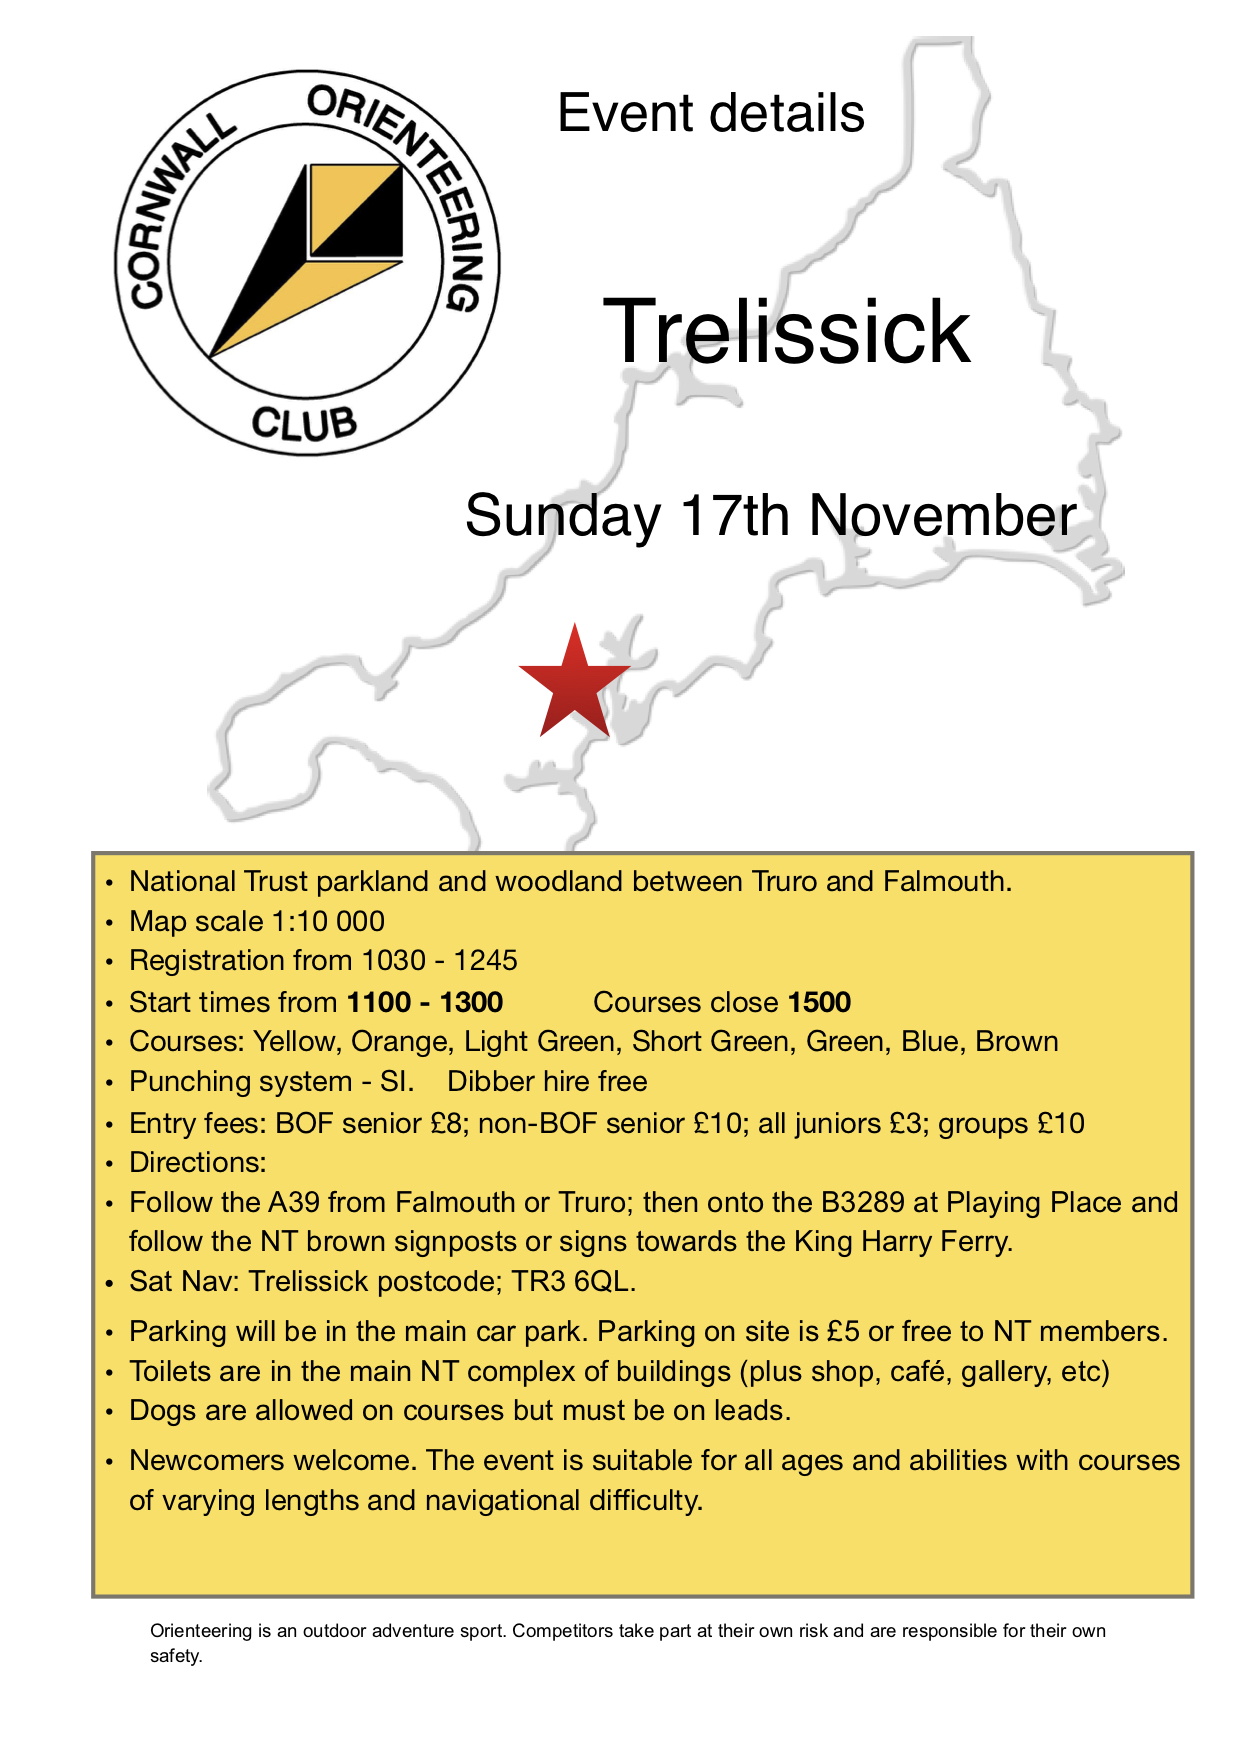 Flyer for Trelissick event